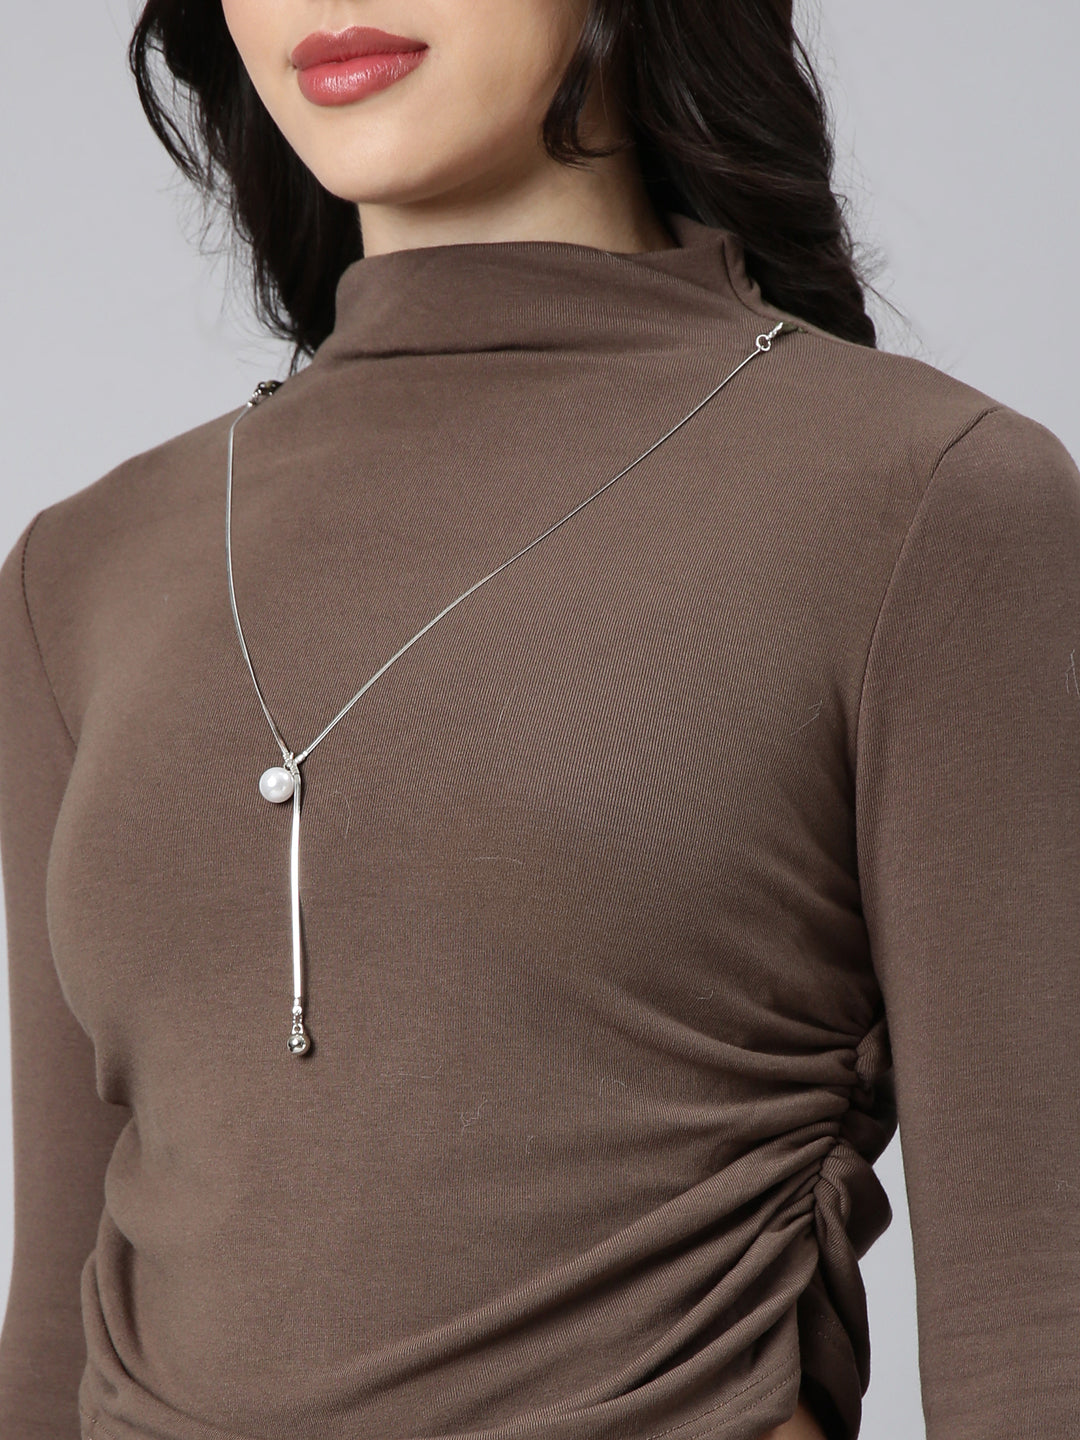 Women Solid Olive Fitted Top Comes with Neck Chain